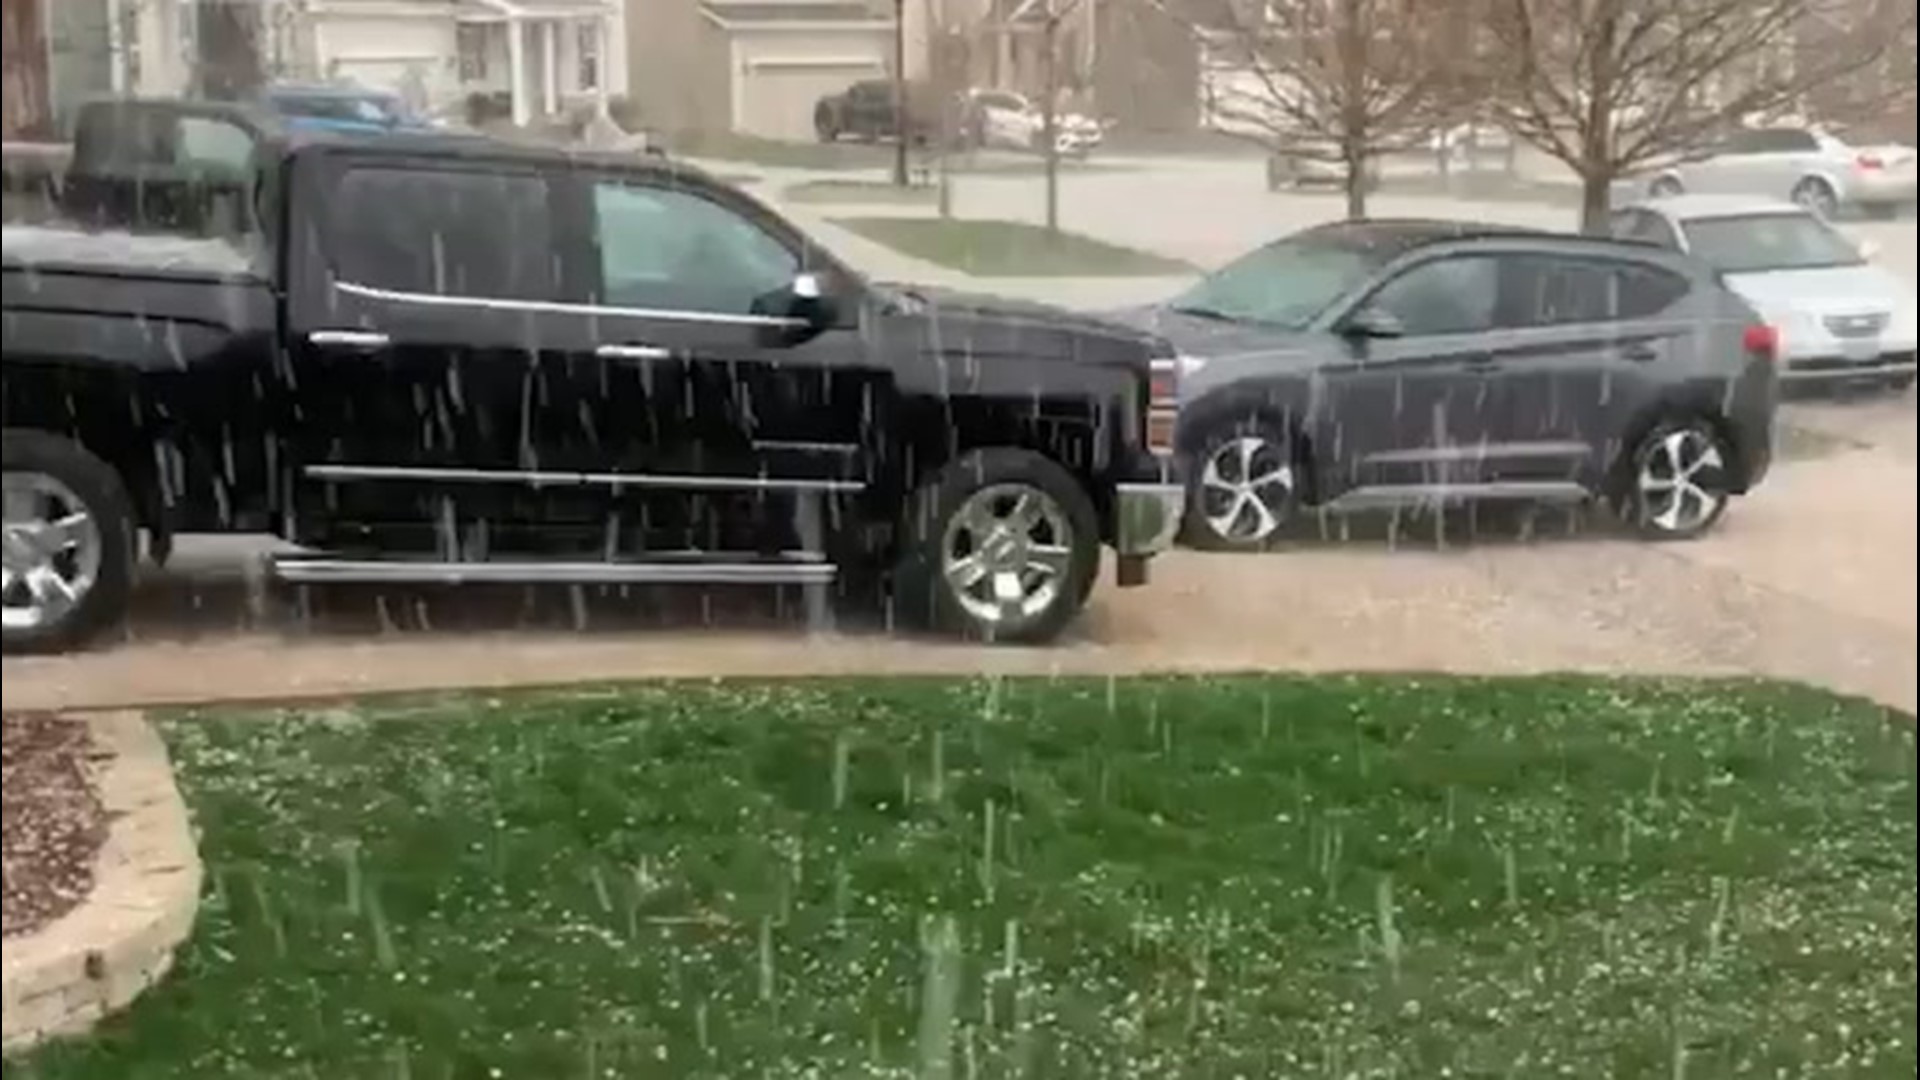 Some heavy hail hit Elgin, Illinois, on April 8, spelling doom for those who don't have the luxury of covered parking.